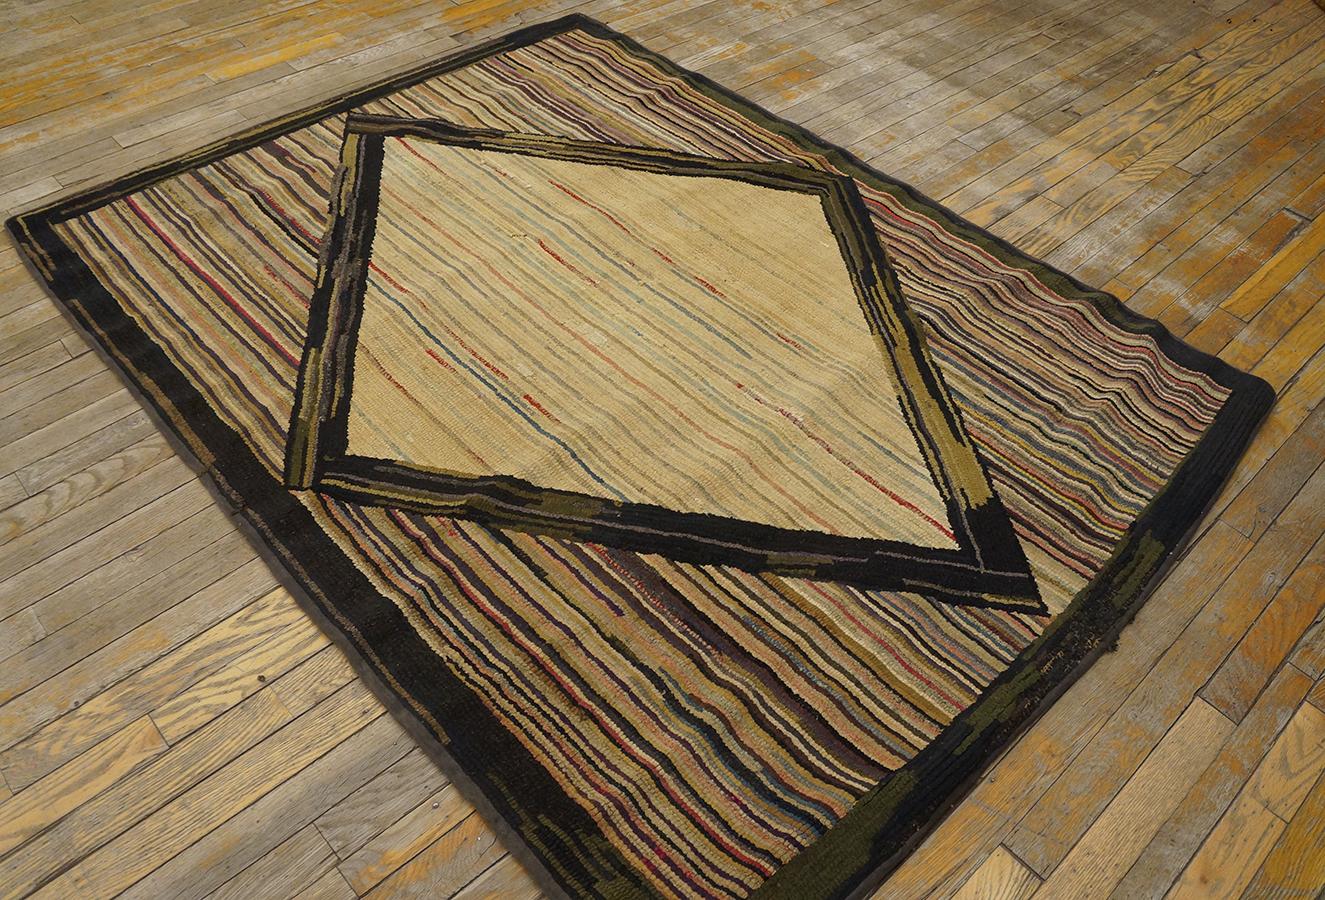 Antique American Hooked rug, size: 4'5